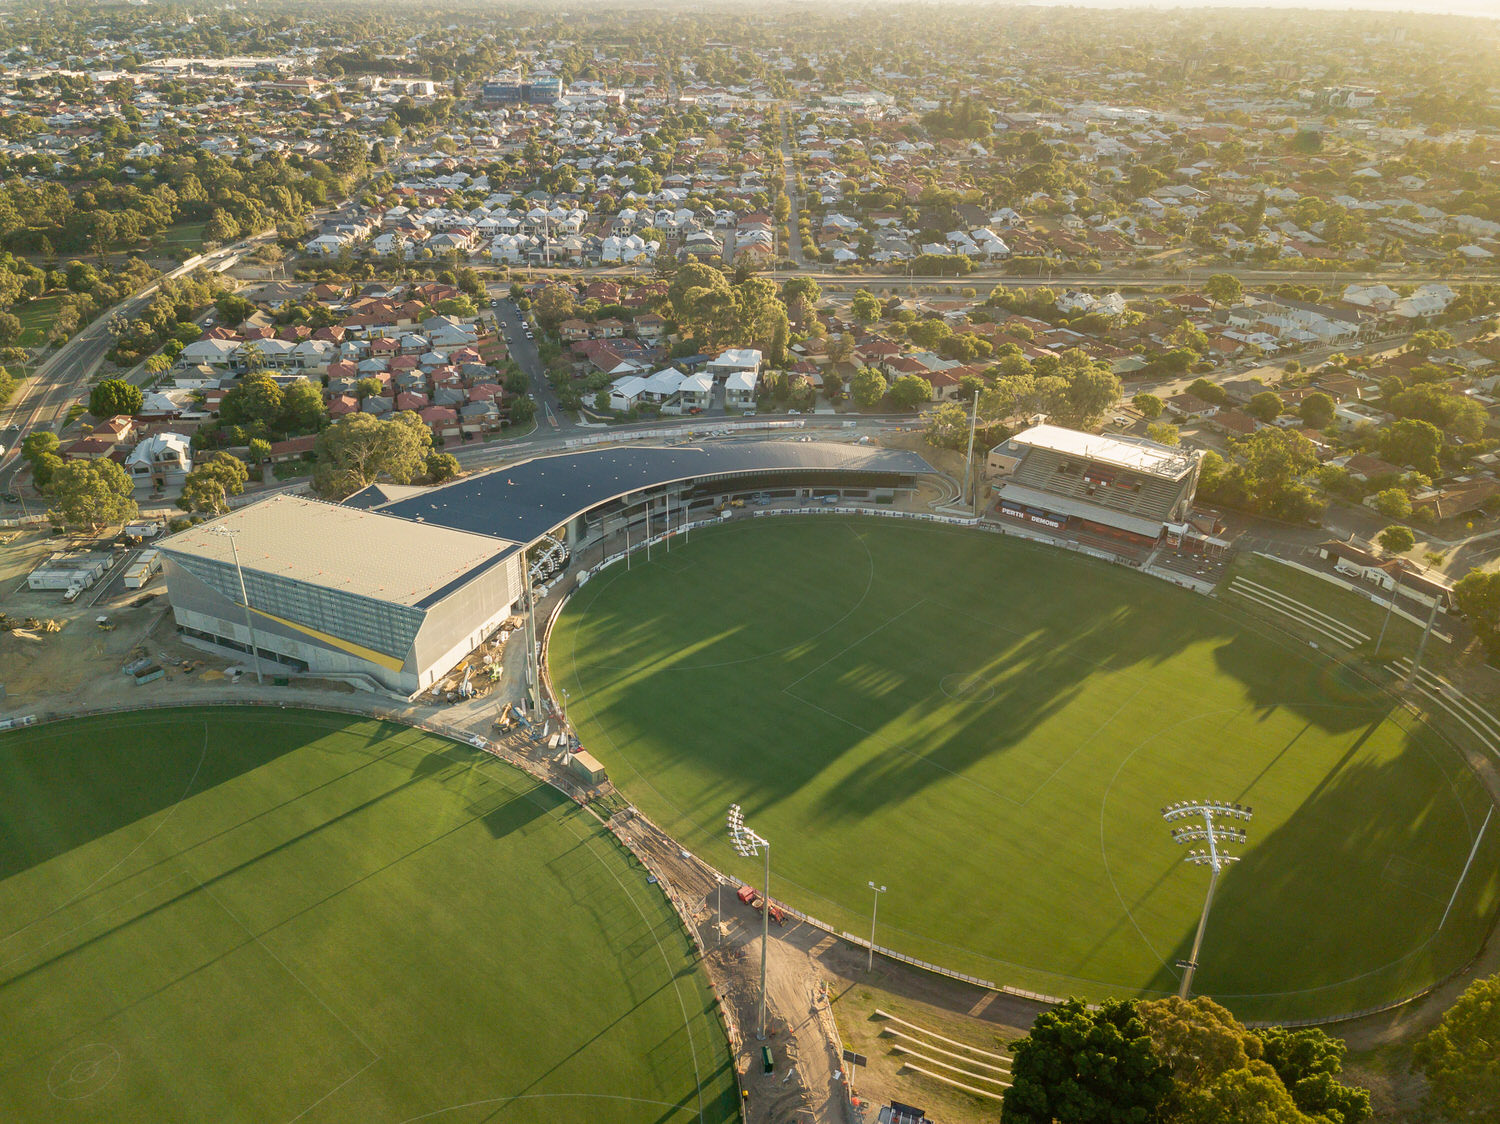 Share your thoughts on the draft Lathlain Park Management Plan